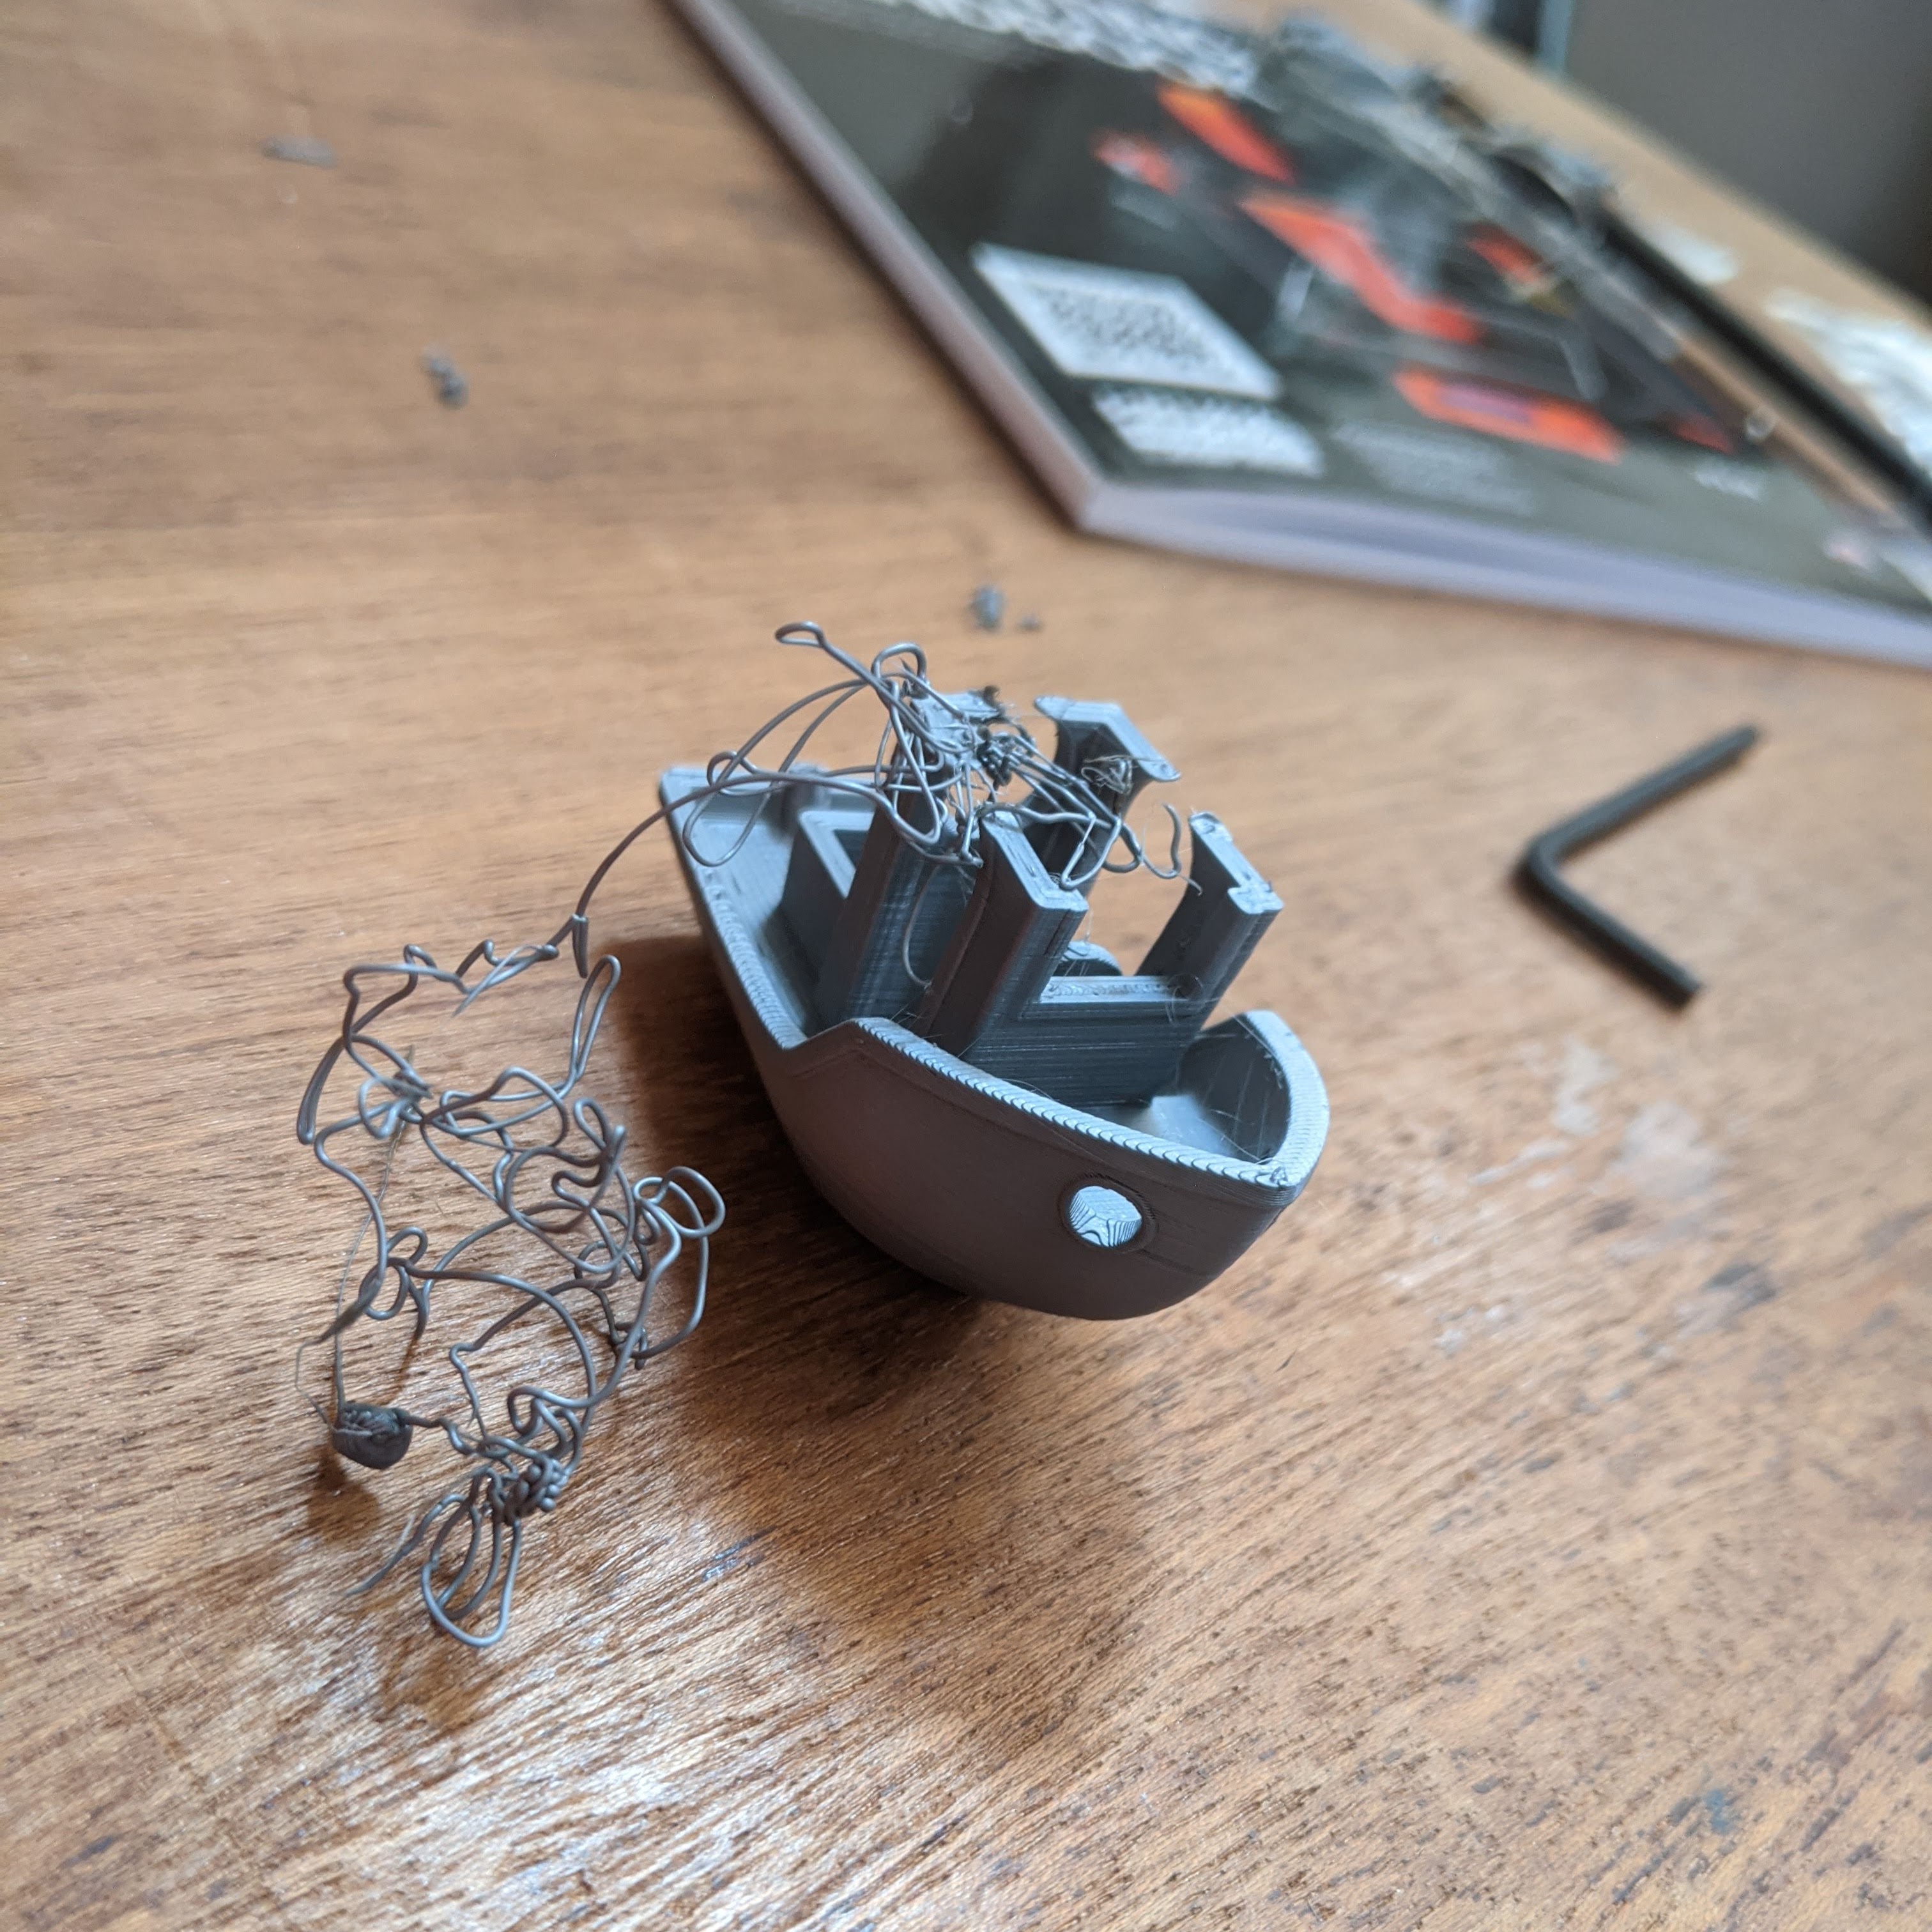 Extra leftover parts, screws, etc? Plus first print ever. – Assembly and  first prints troubleshooting – Prusa3D Forum